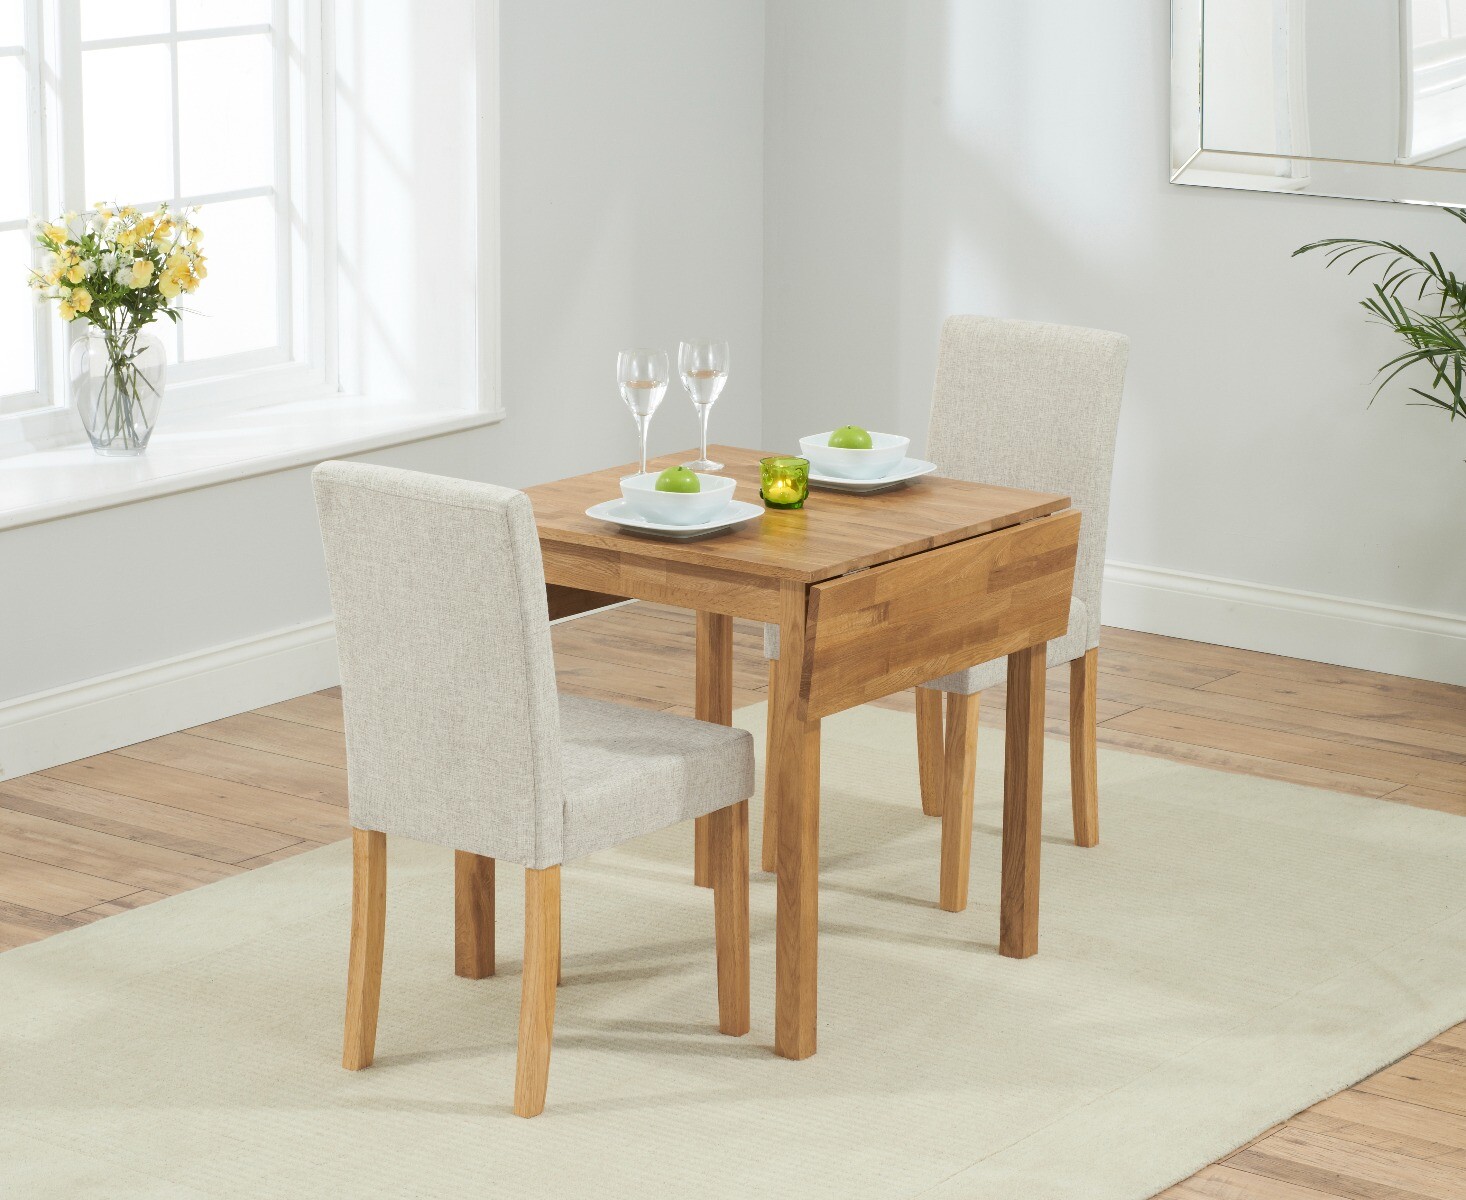 Extending York 70cm Solid Oak Dining Table With 2 Natural Lila Fabric Chairs